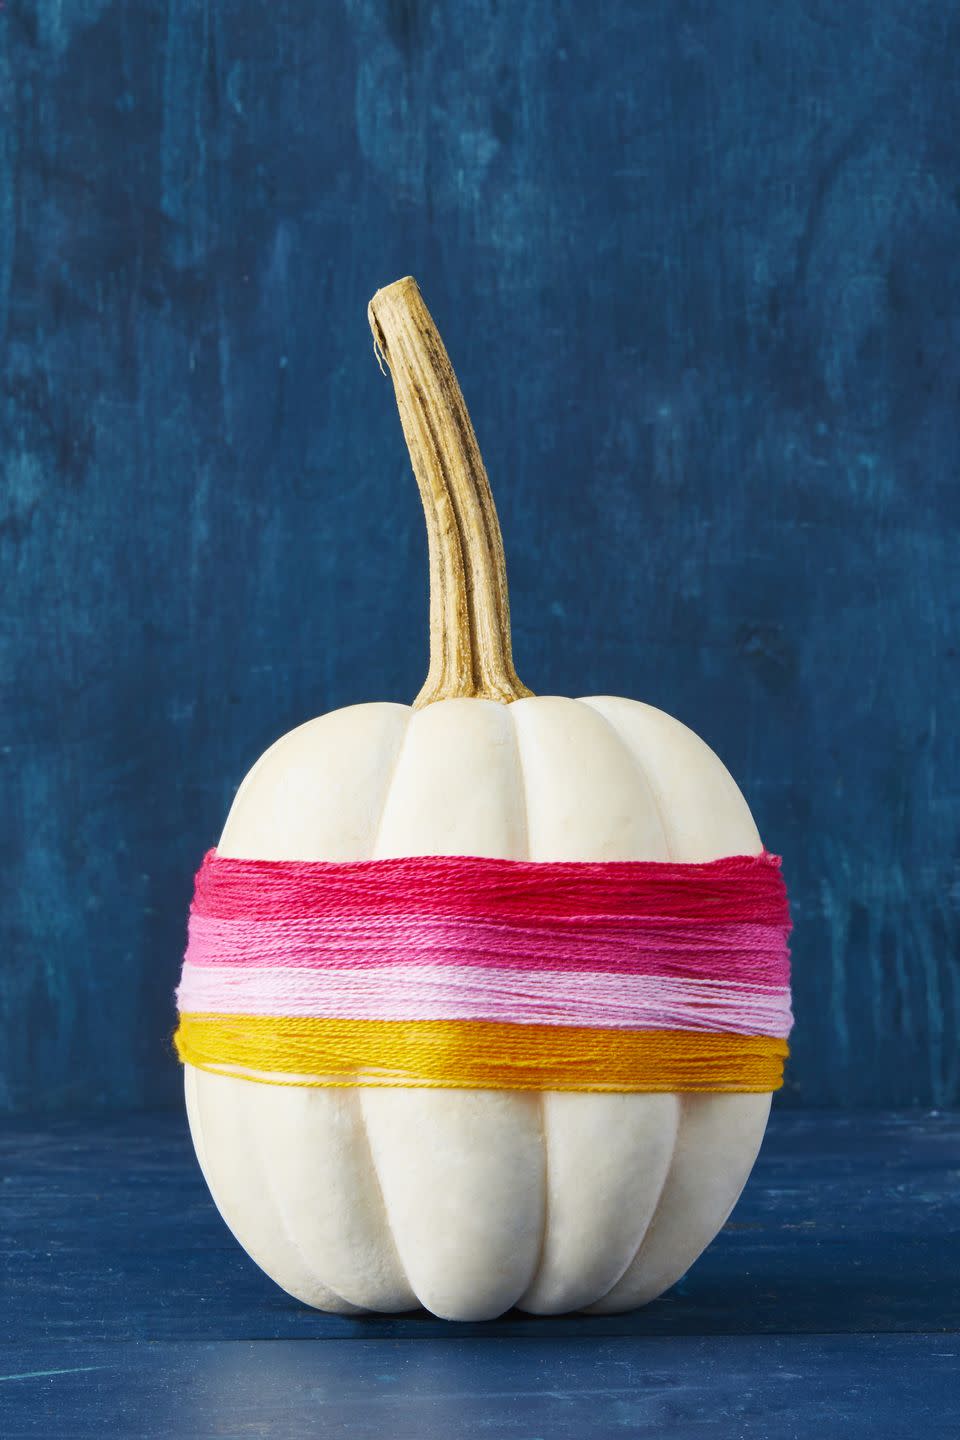 Tied-Up Gourd